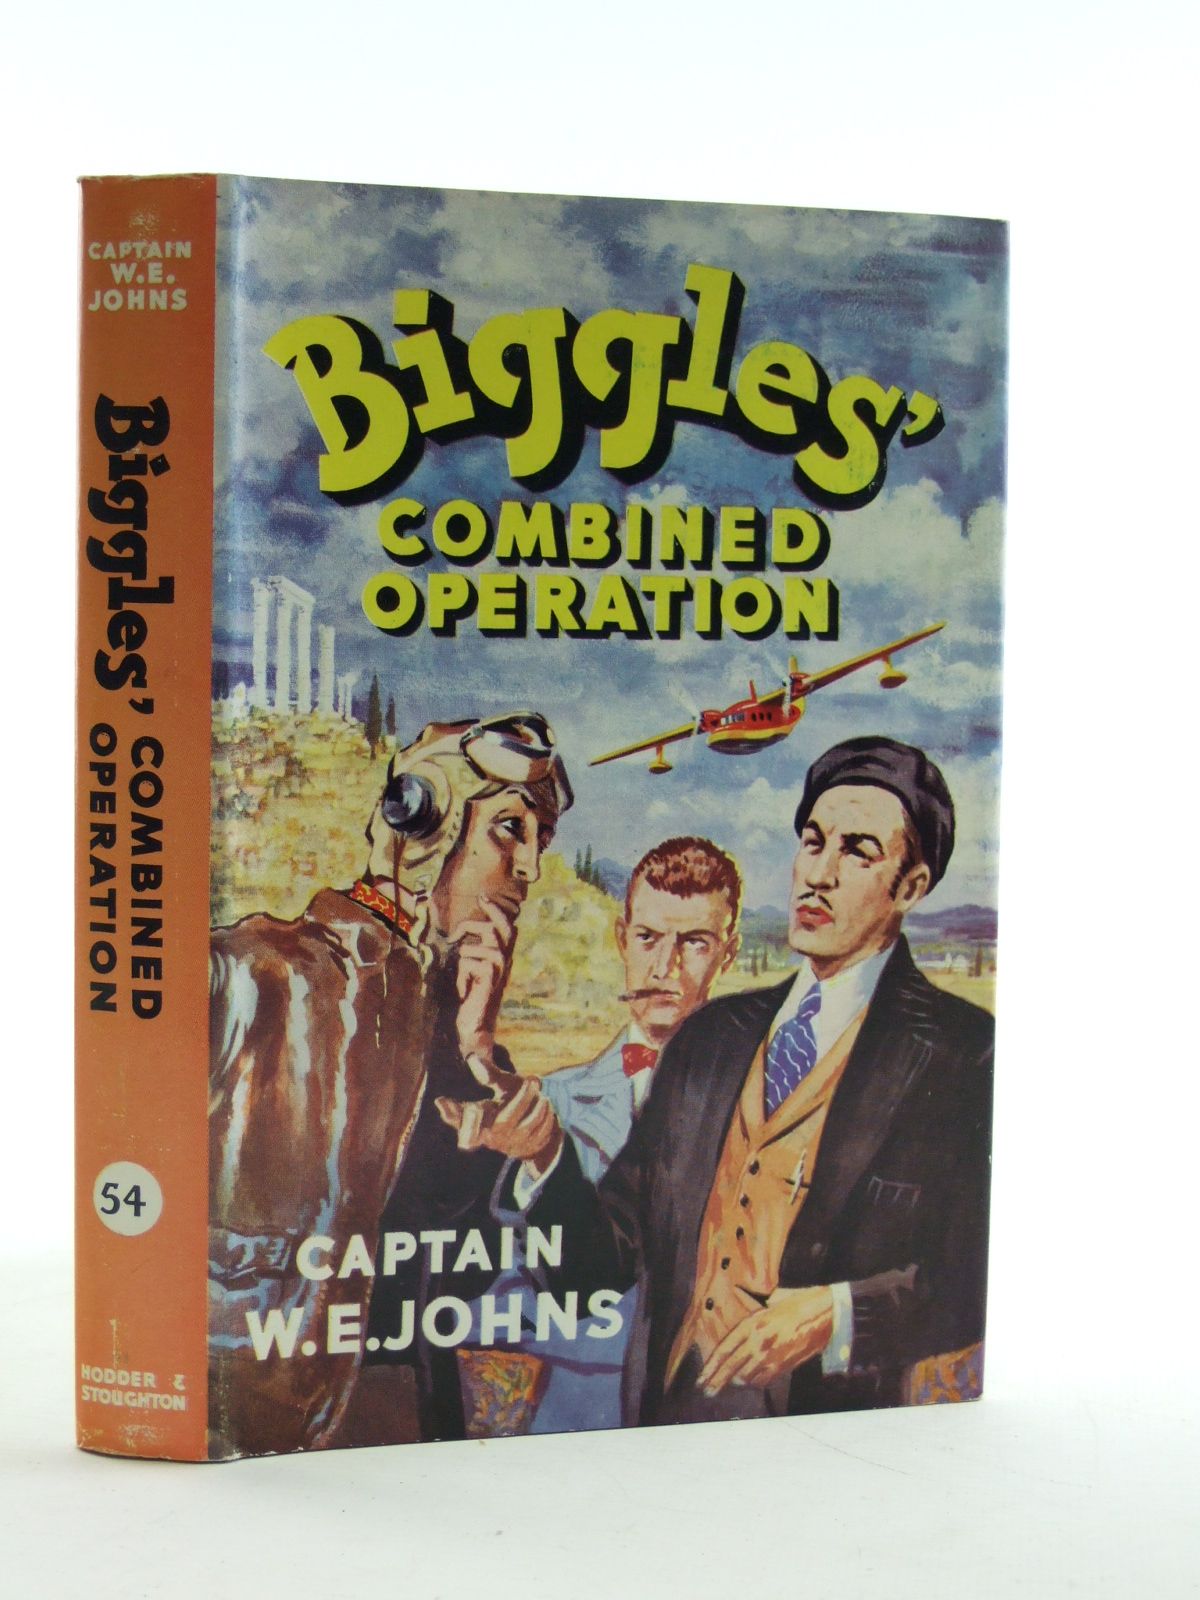 Cover of BIGGLES' COMBINED OPERATION by W.E. Johns